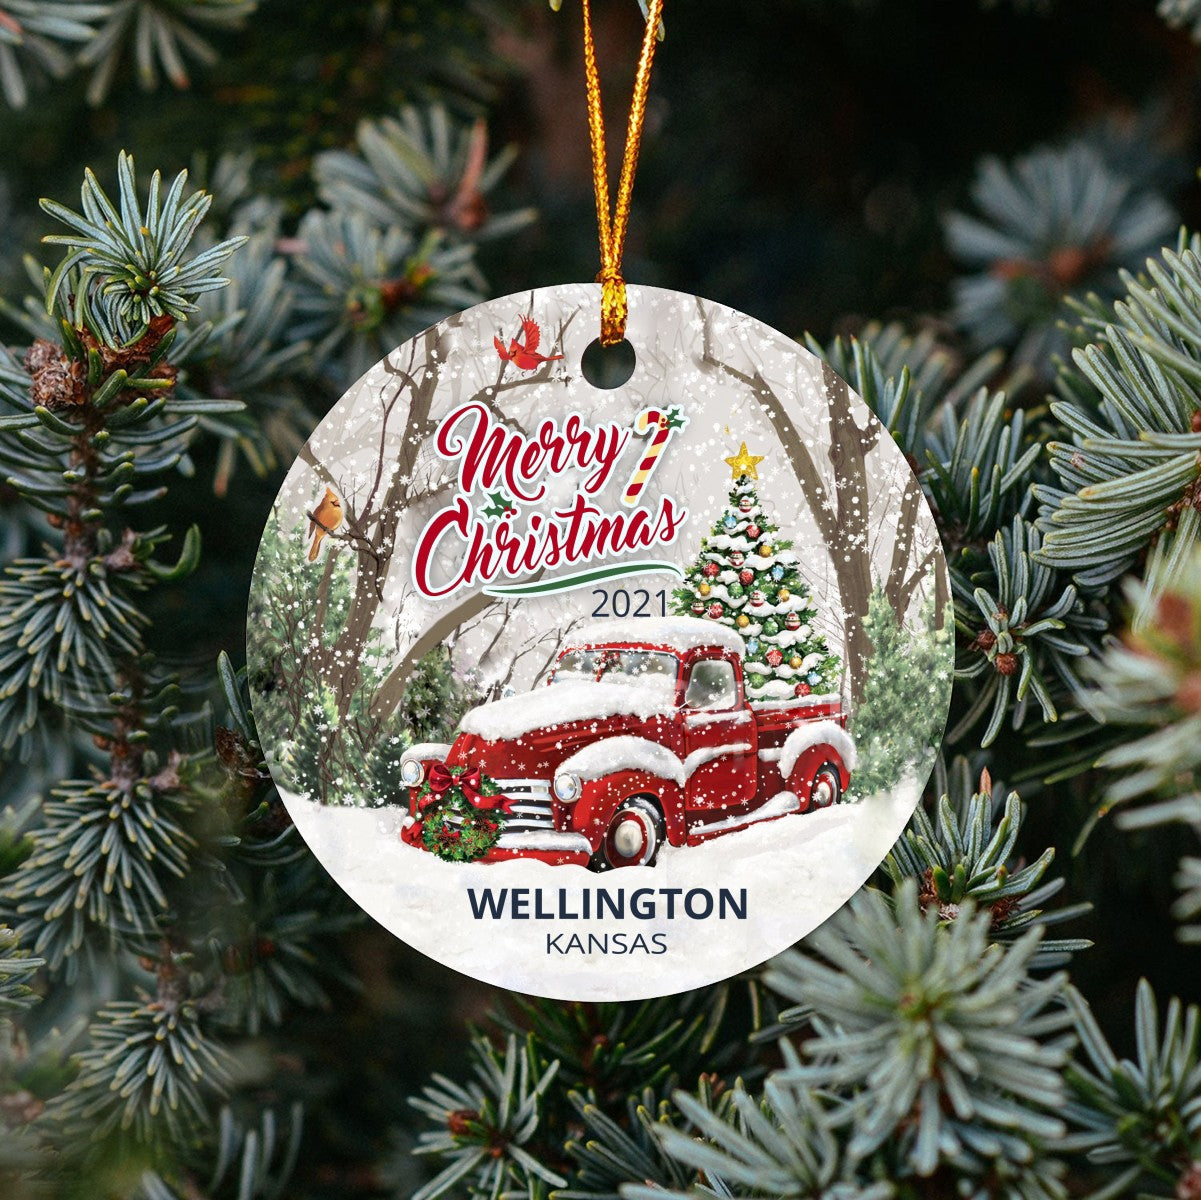 Christmas Tree Ornaments Wellington - Ornament With Name City, State Wellington Kansas KS Ornament - Red Truck Xmas Ornaments 3'' Plastic Gift For Family, Friend And Housewarming